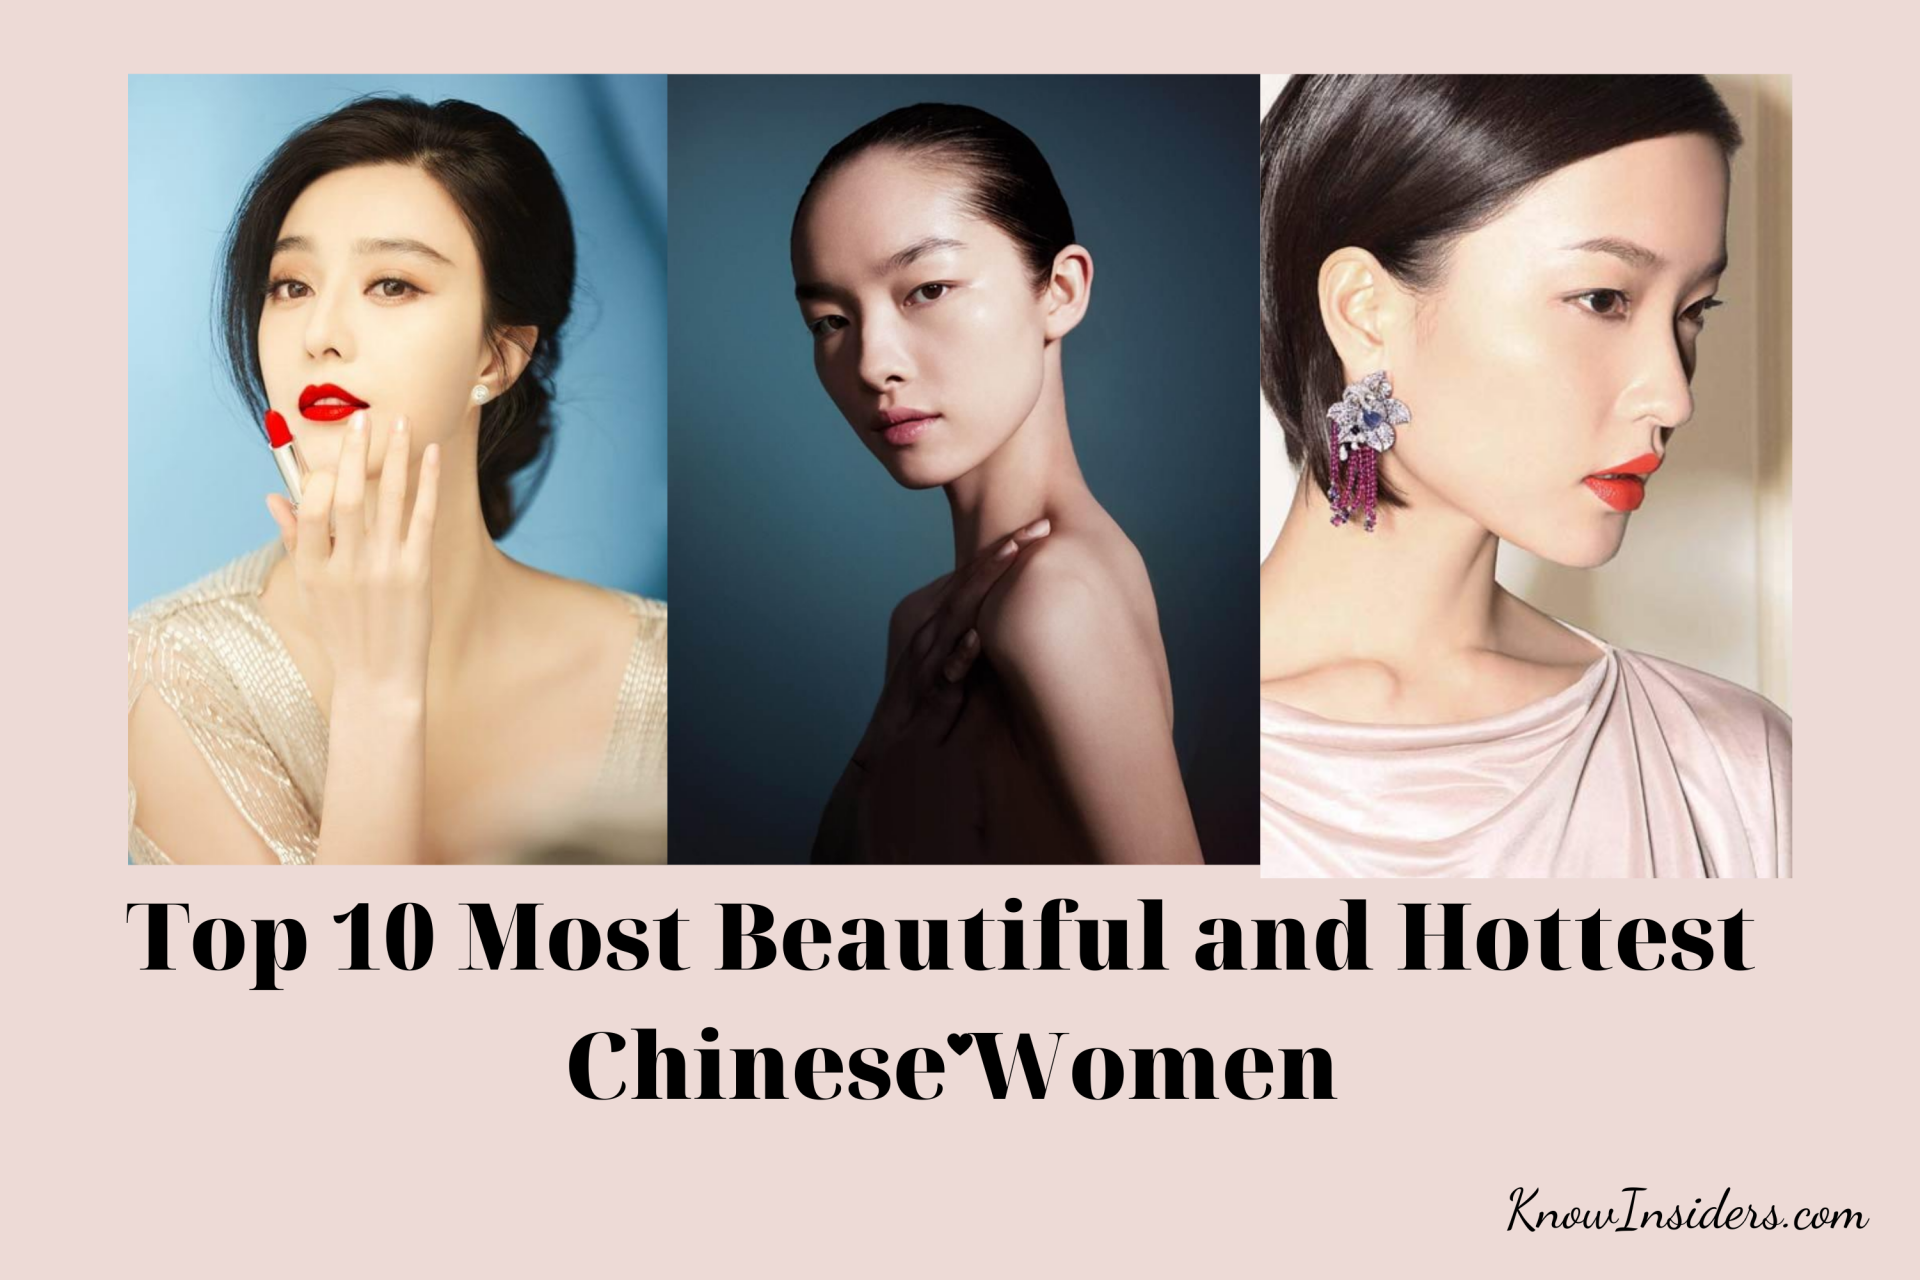 Top 10 Most Hottest and Beautiful Chinese Women - Updated